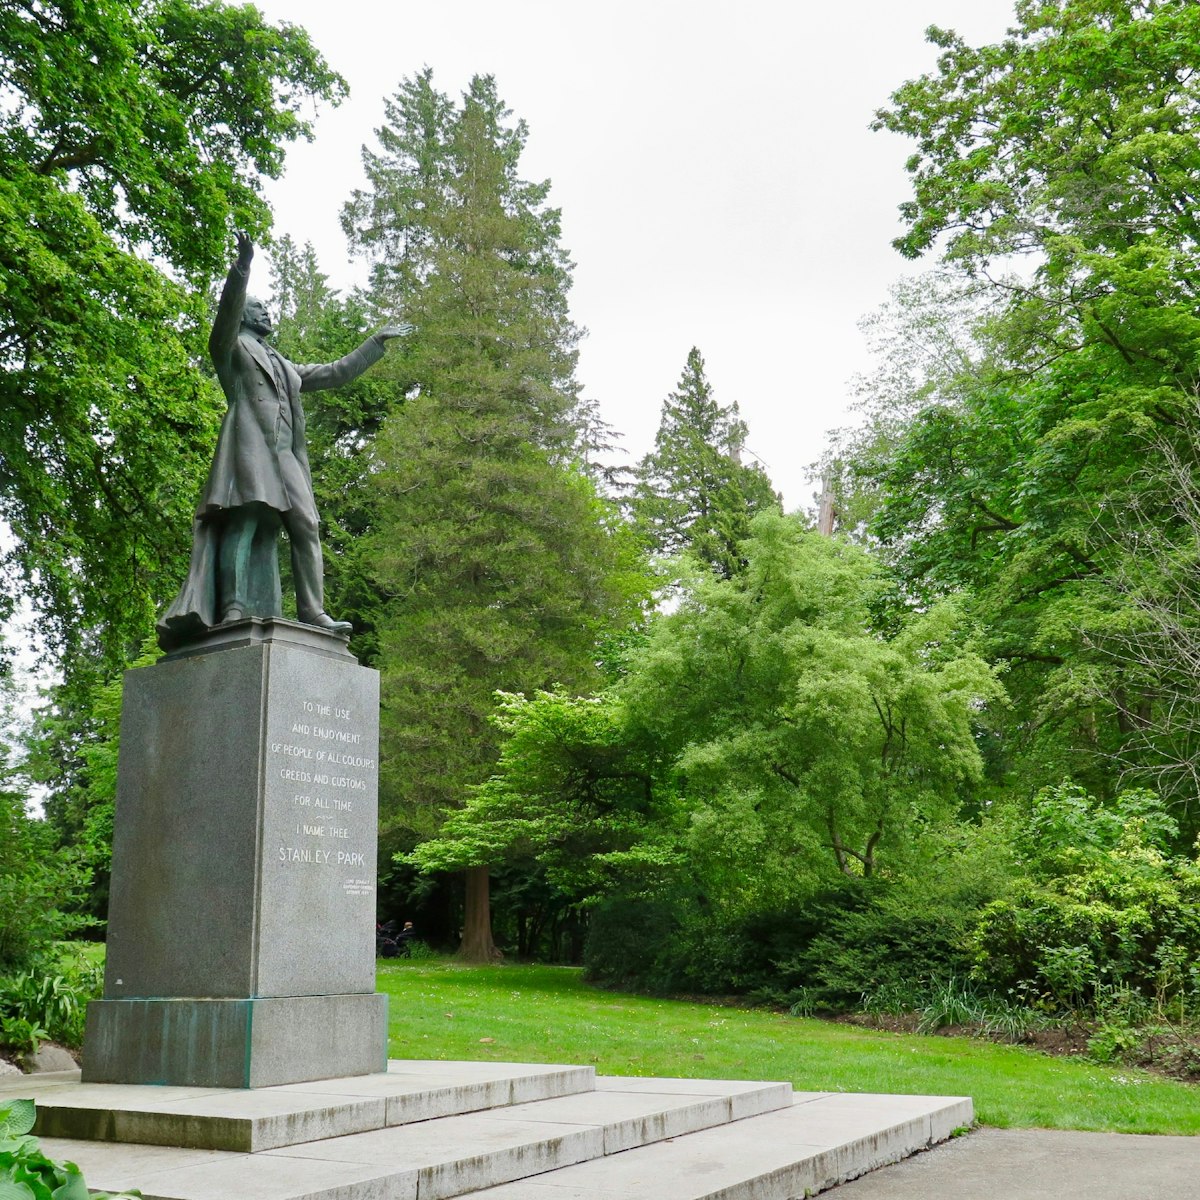 The statue of Lord Stanley, looking out on the celebrated park named after him in Vancouver